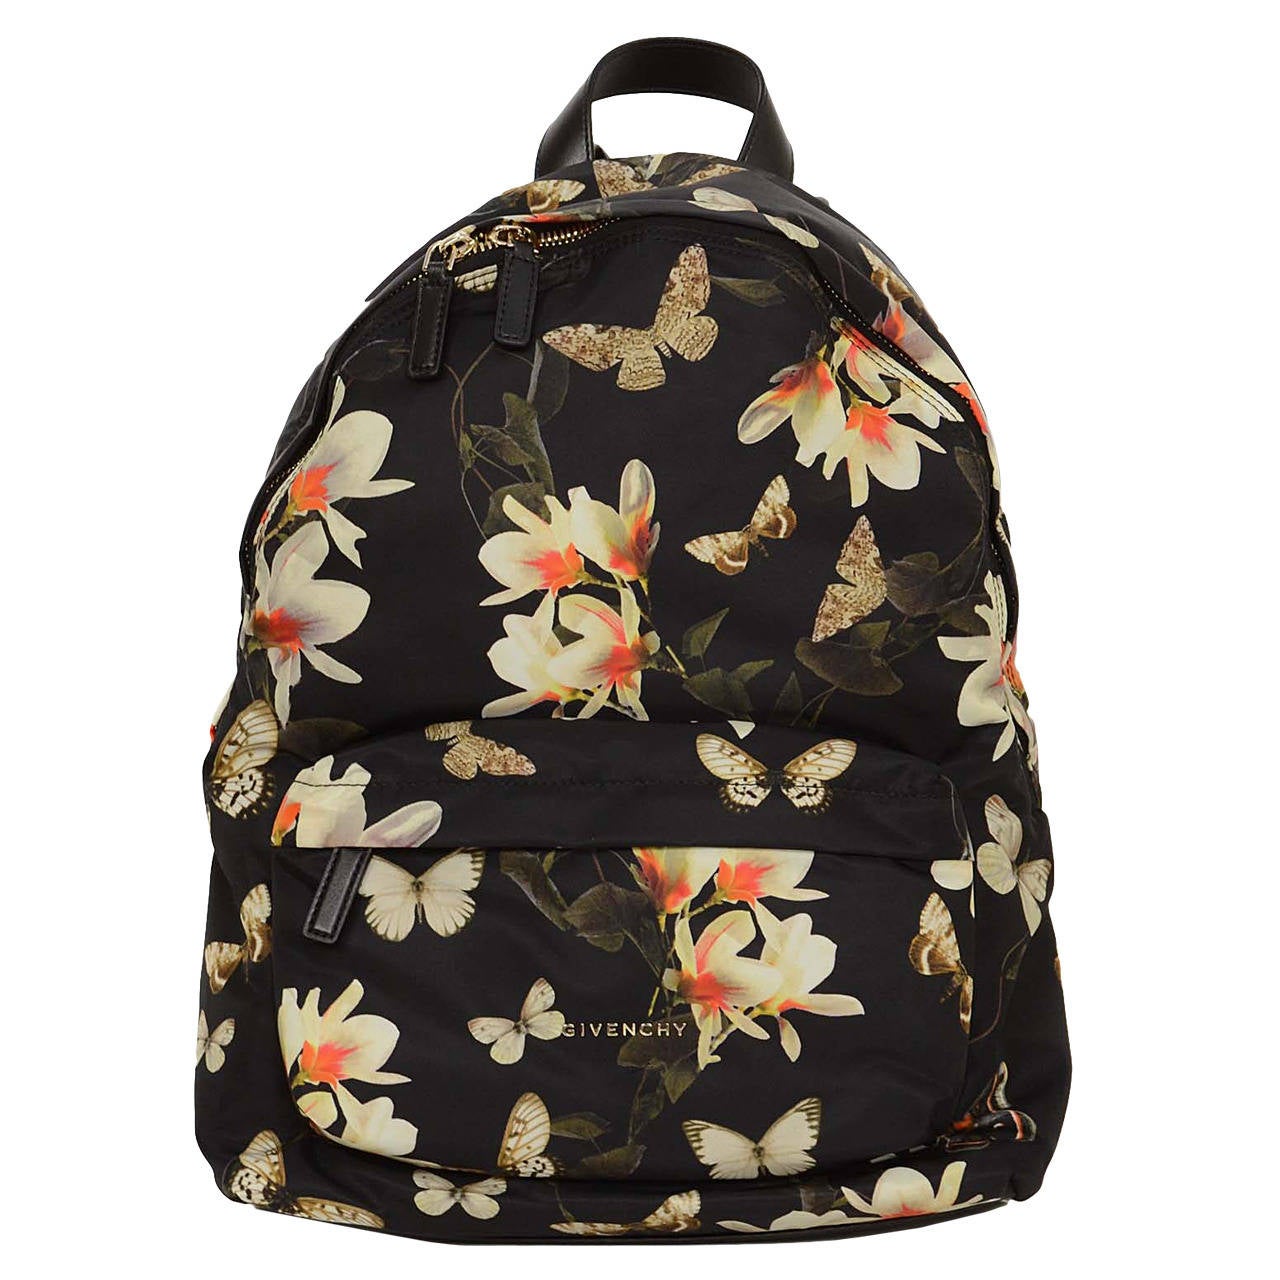 GIVENCHY Black Nano Mini Backpack With Ink Blot Floral Pattern; Preloved